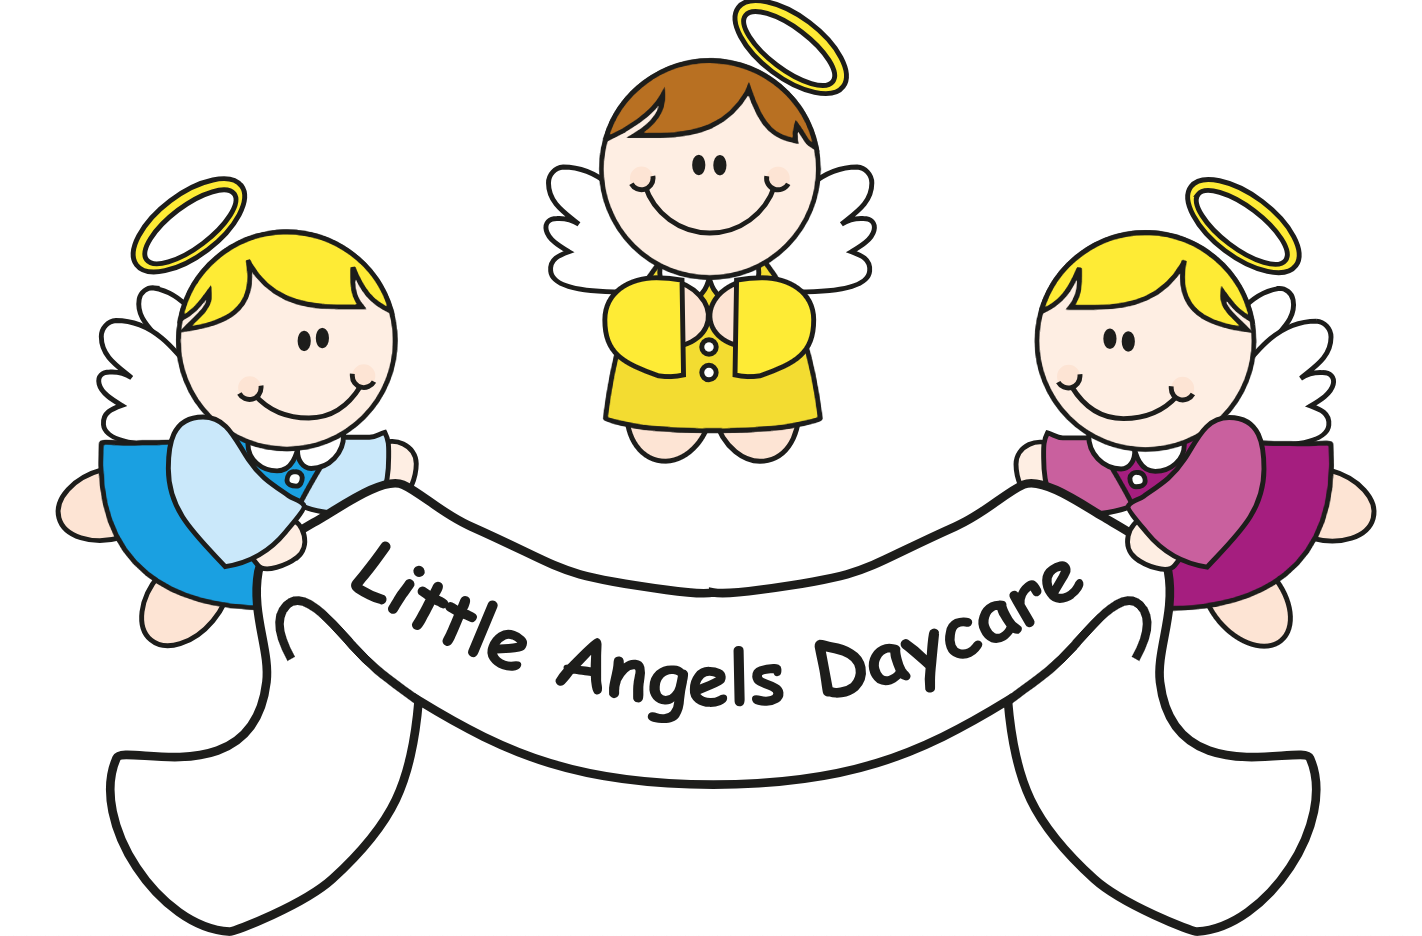 Little Angels Daycare